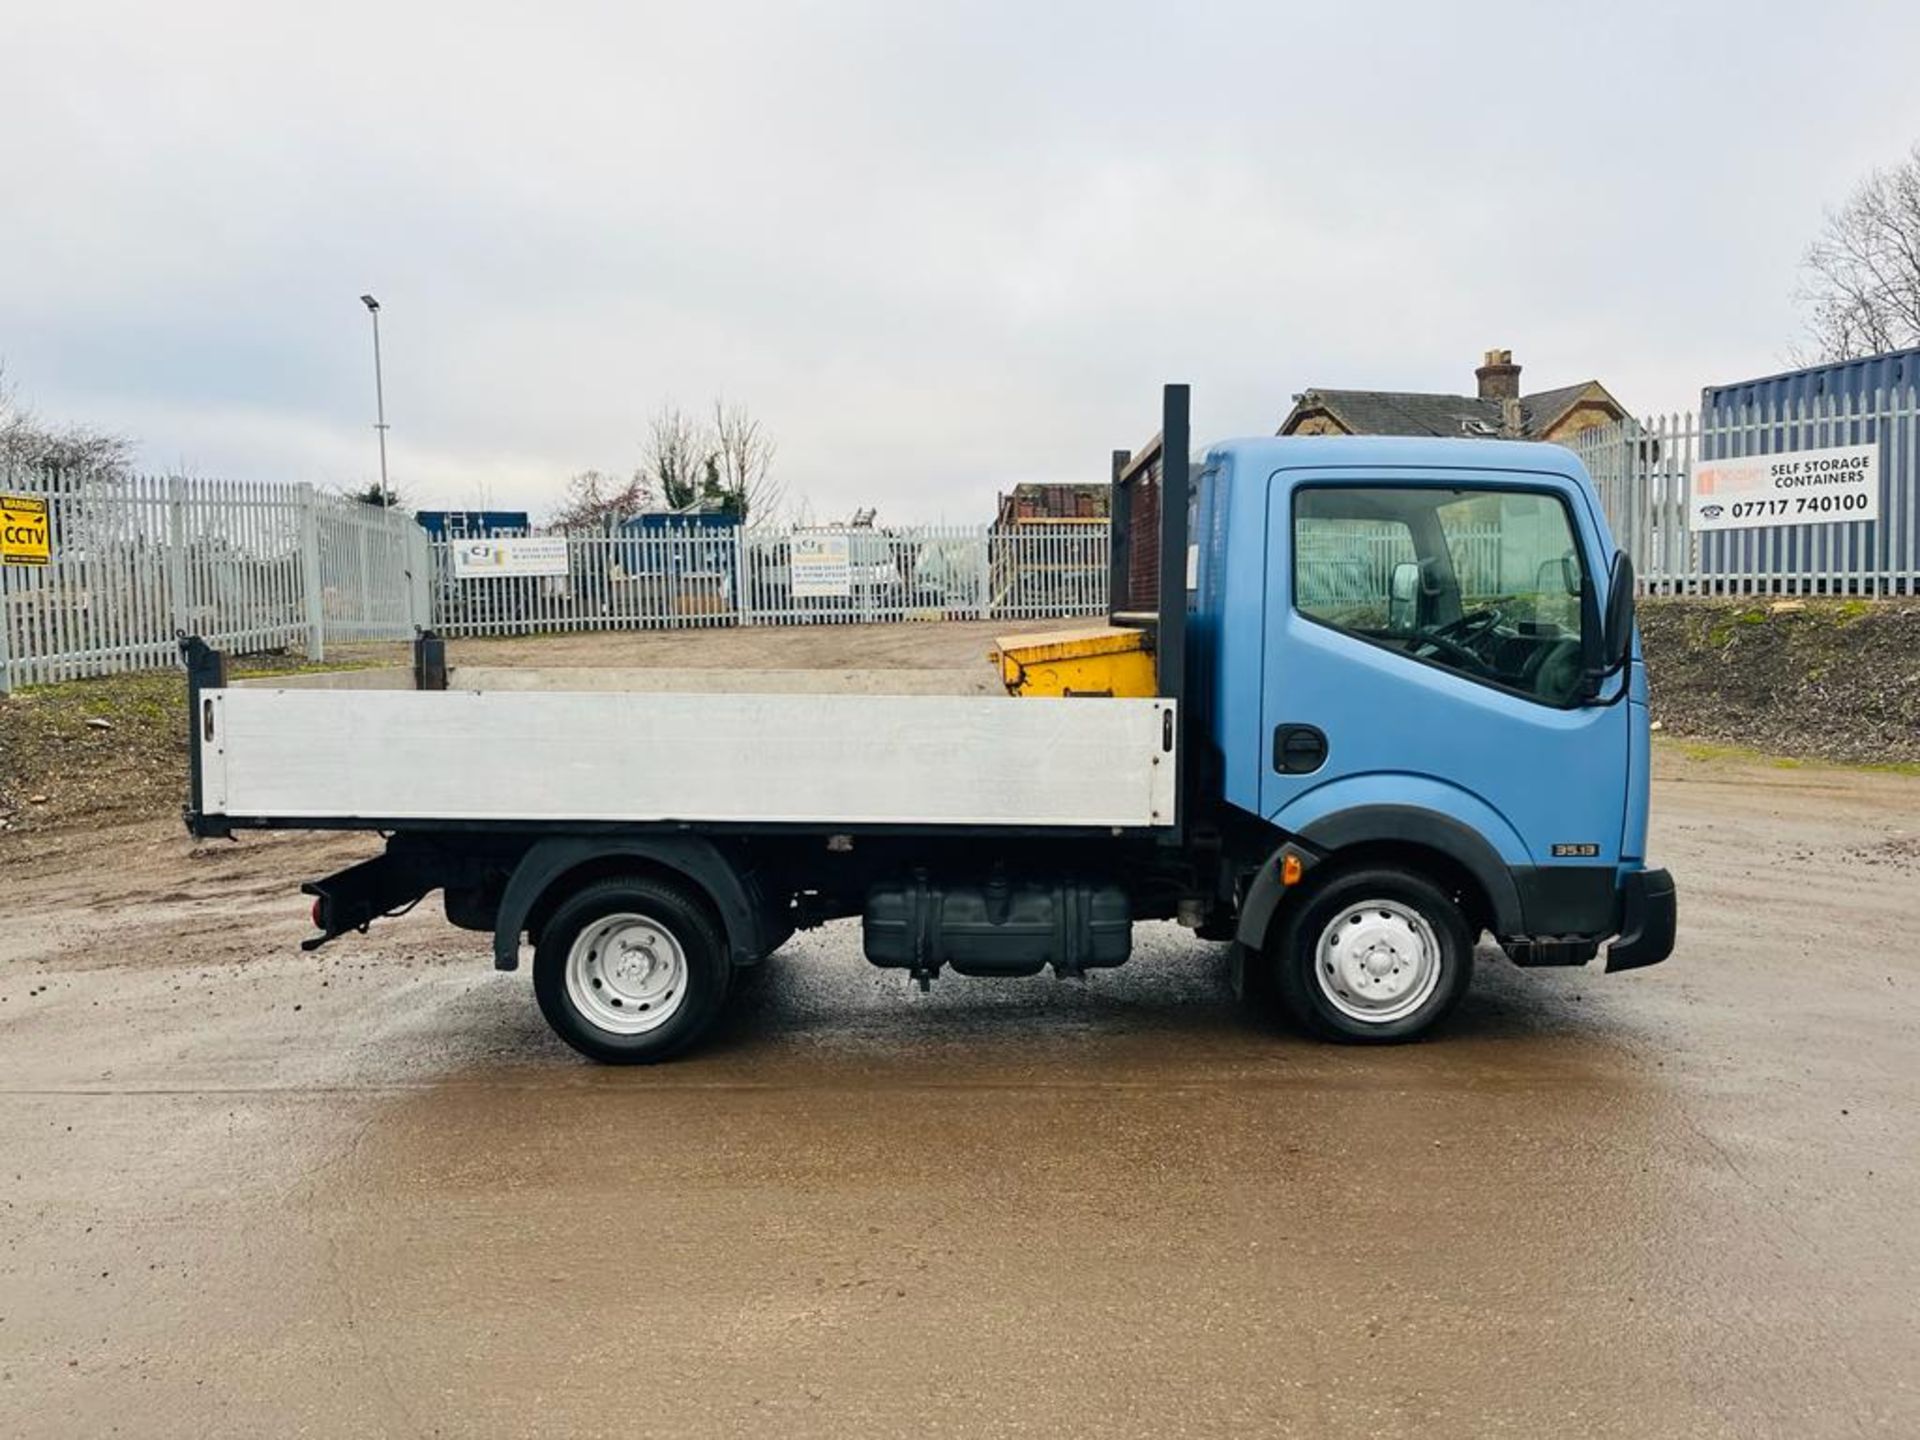 ** ON SALE **Nissan CabStar 2.5 DCI Alloy Tipper Twin Axle 2007 '57 Reg' No Vat - Image 10 of 23